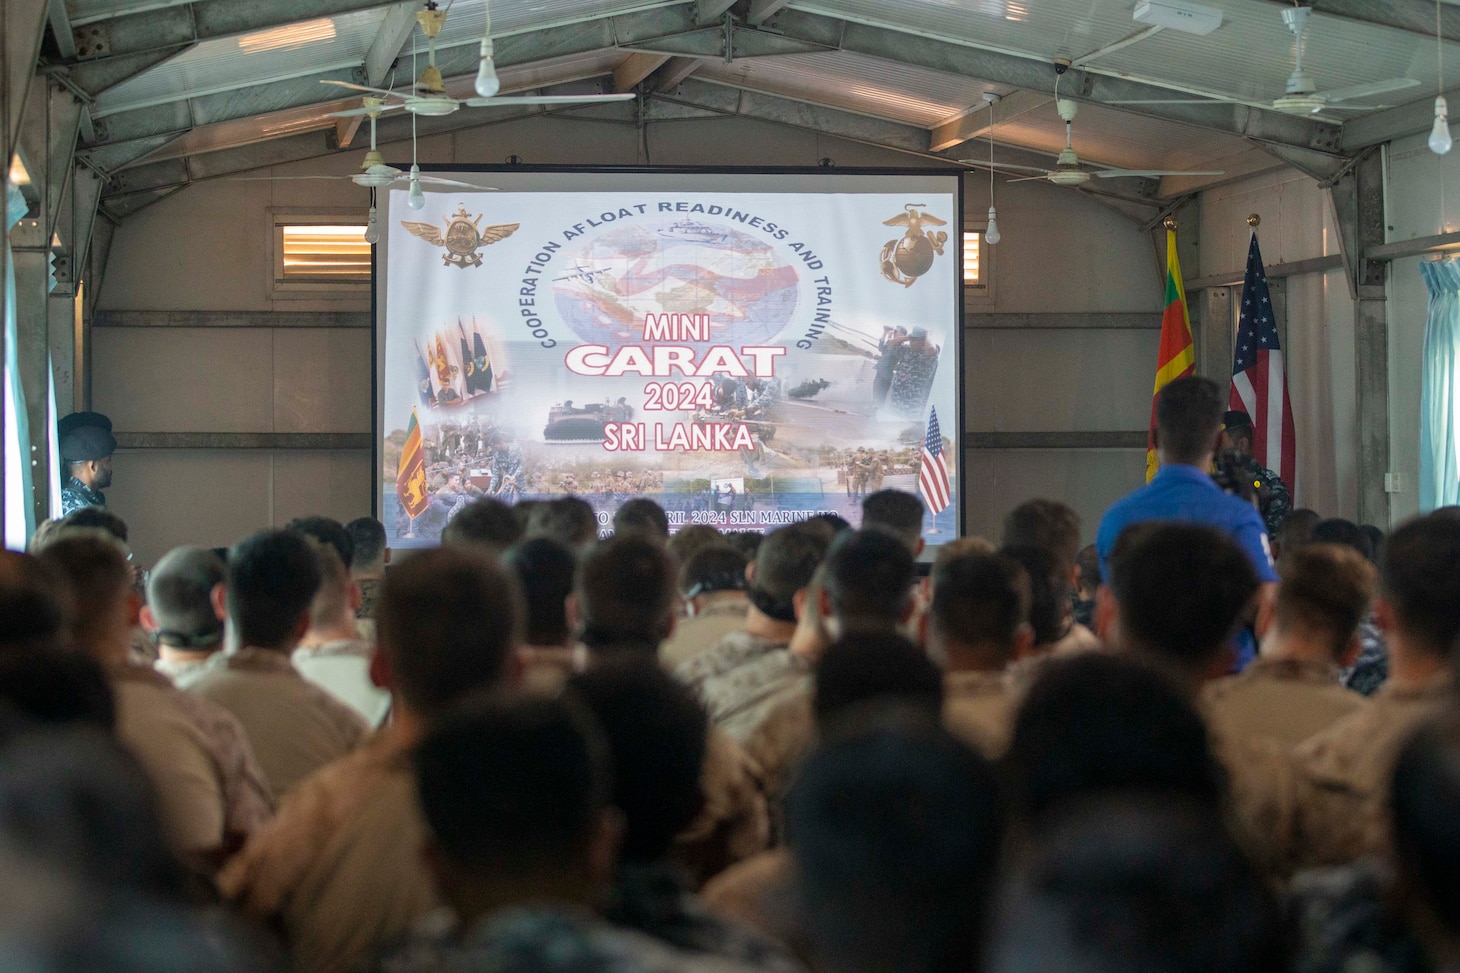 U.S. Marines assigned Fleet Anti-Terrorism Security Team Pacific and Marines of the Sri Lankan Navy attend an opening ceremony to mark the beginning of exercise Cooperation Afloat Readiness and Training (CARAT) Sri Lanka 2024 at SLNS Vidura, April 22. CARAT Sri Lanka is a bilateral exercise between Sri Lanka and the United States designed to promote regional security cooperation and strengthen maritime understanding, partnerships, and interoperability. In its 29th year, the CARAT series is comprised of multinational exercises, designed to enhance U.S. and partner forces’ abilities to operate together in response to traditional and non-traditional maritime security challenges in the Indo-Pacific region. (U.S. Navy photo by Mass Communication Specialist 1st Class Charles Oki)